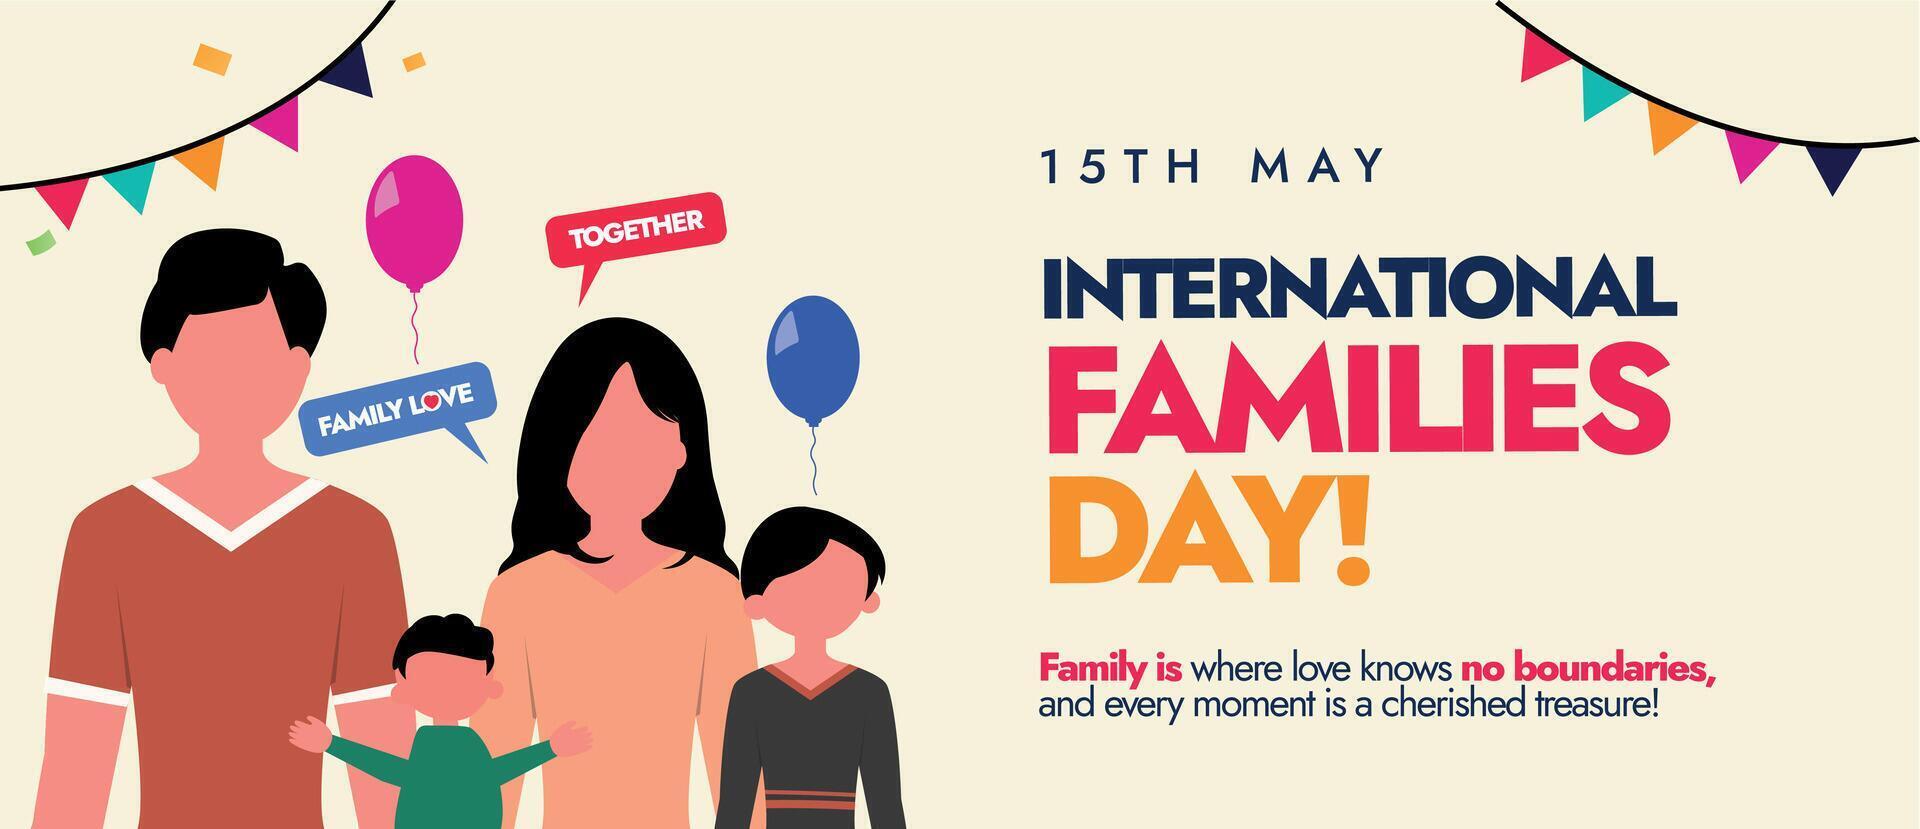 International families day. 15th May International families day celebration cover banner with family of four father, mother, daughter, son, balloons, colourful hanging flags, speech bubbles. vector